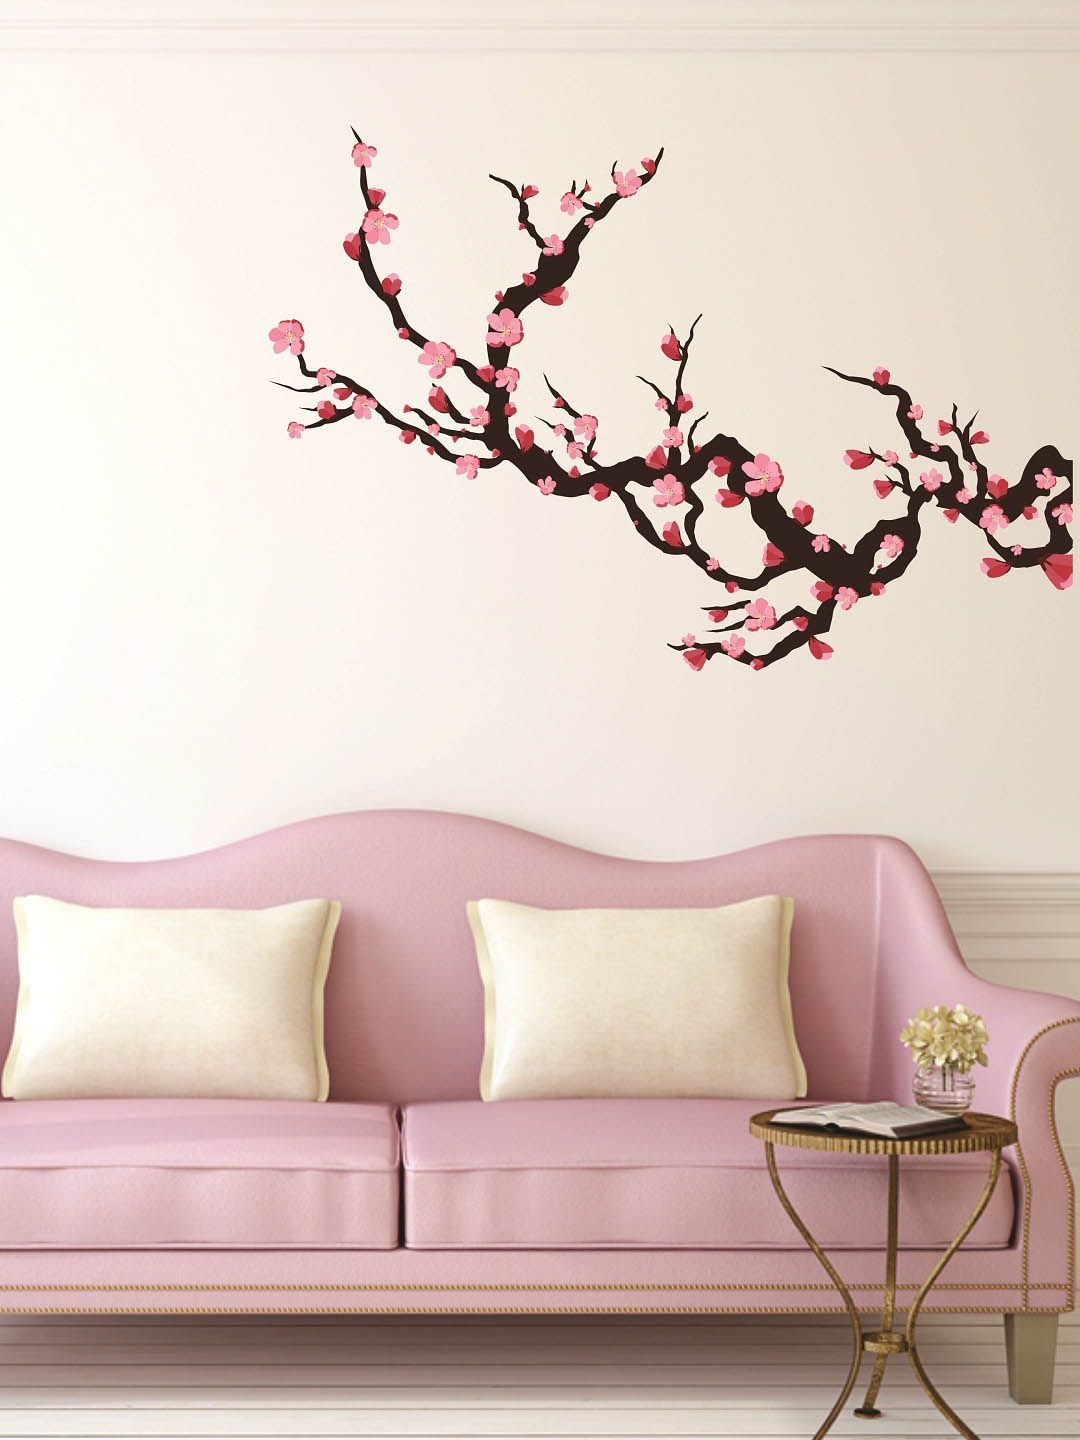 WALLSTICK Black & Pink Floral Large Vinyl Wall Sticker Price in India